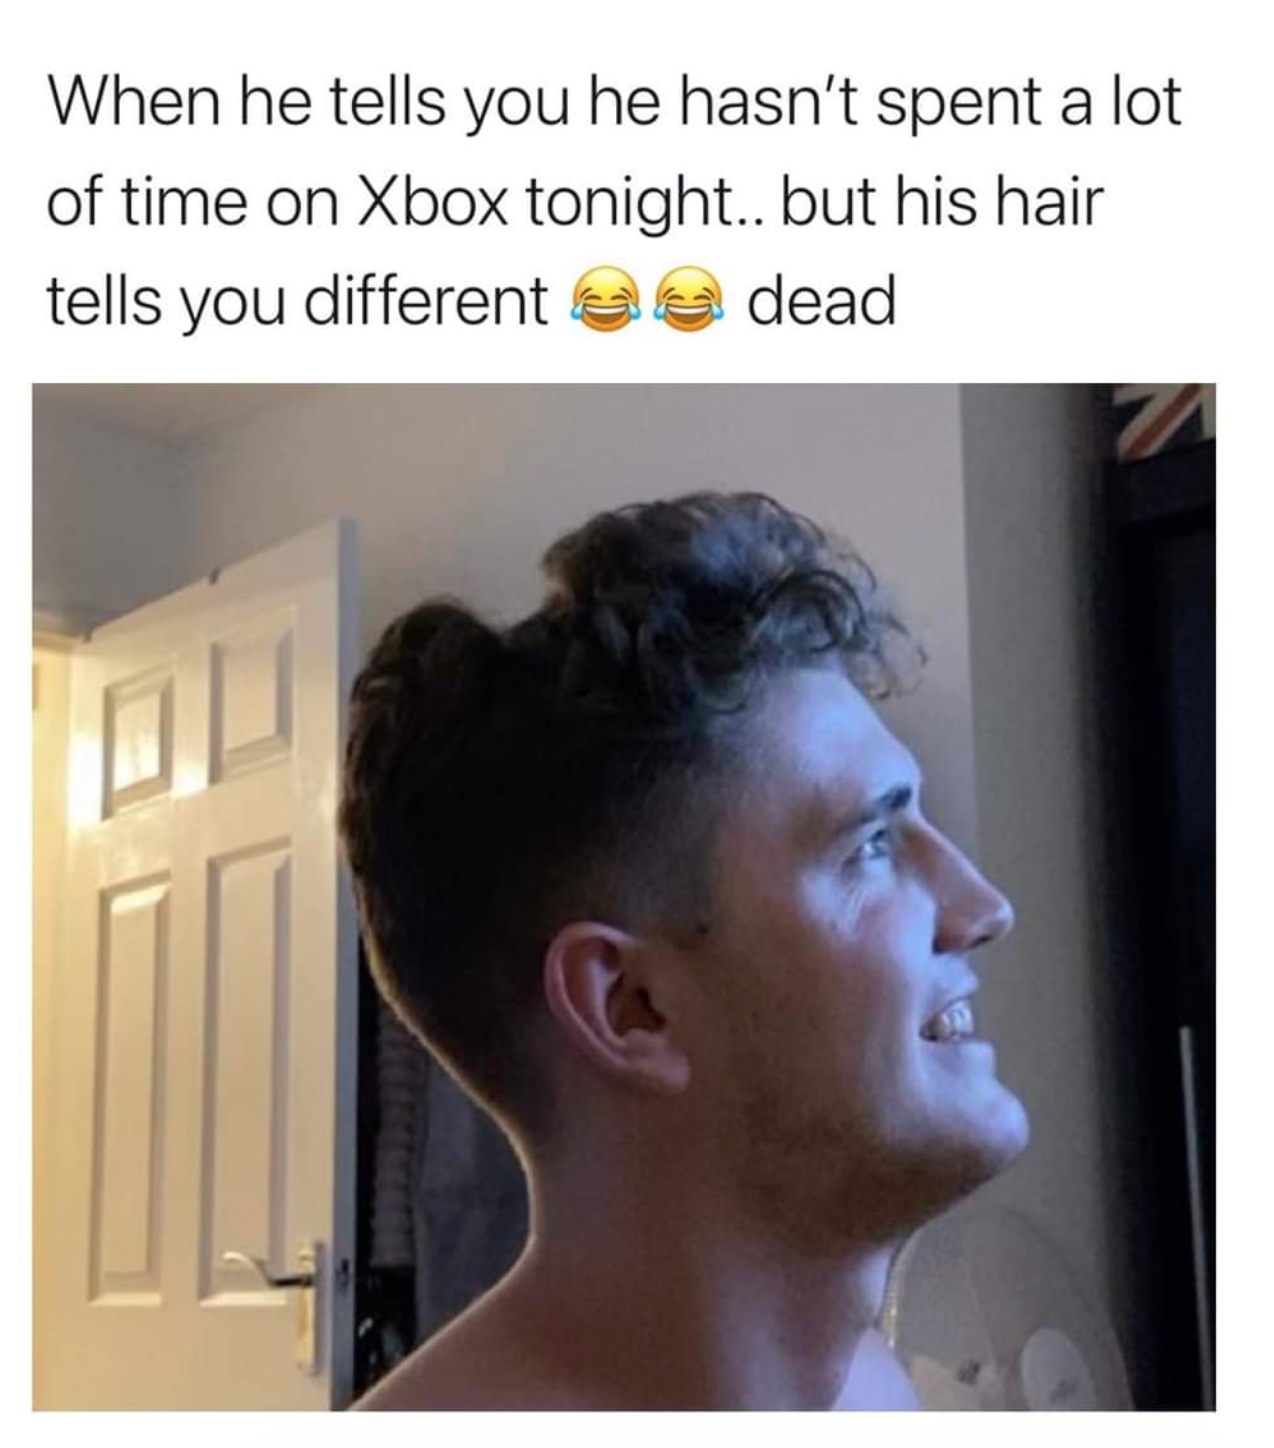 funny gaming memes - hairstyle - When he tells you he hasn't spent a lot of time on Xbox tonight.. but his hair tells you differente a dead